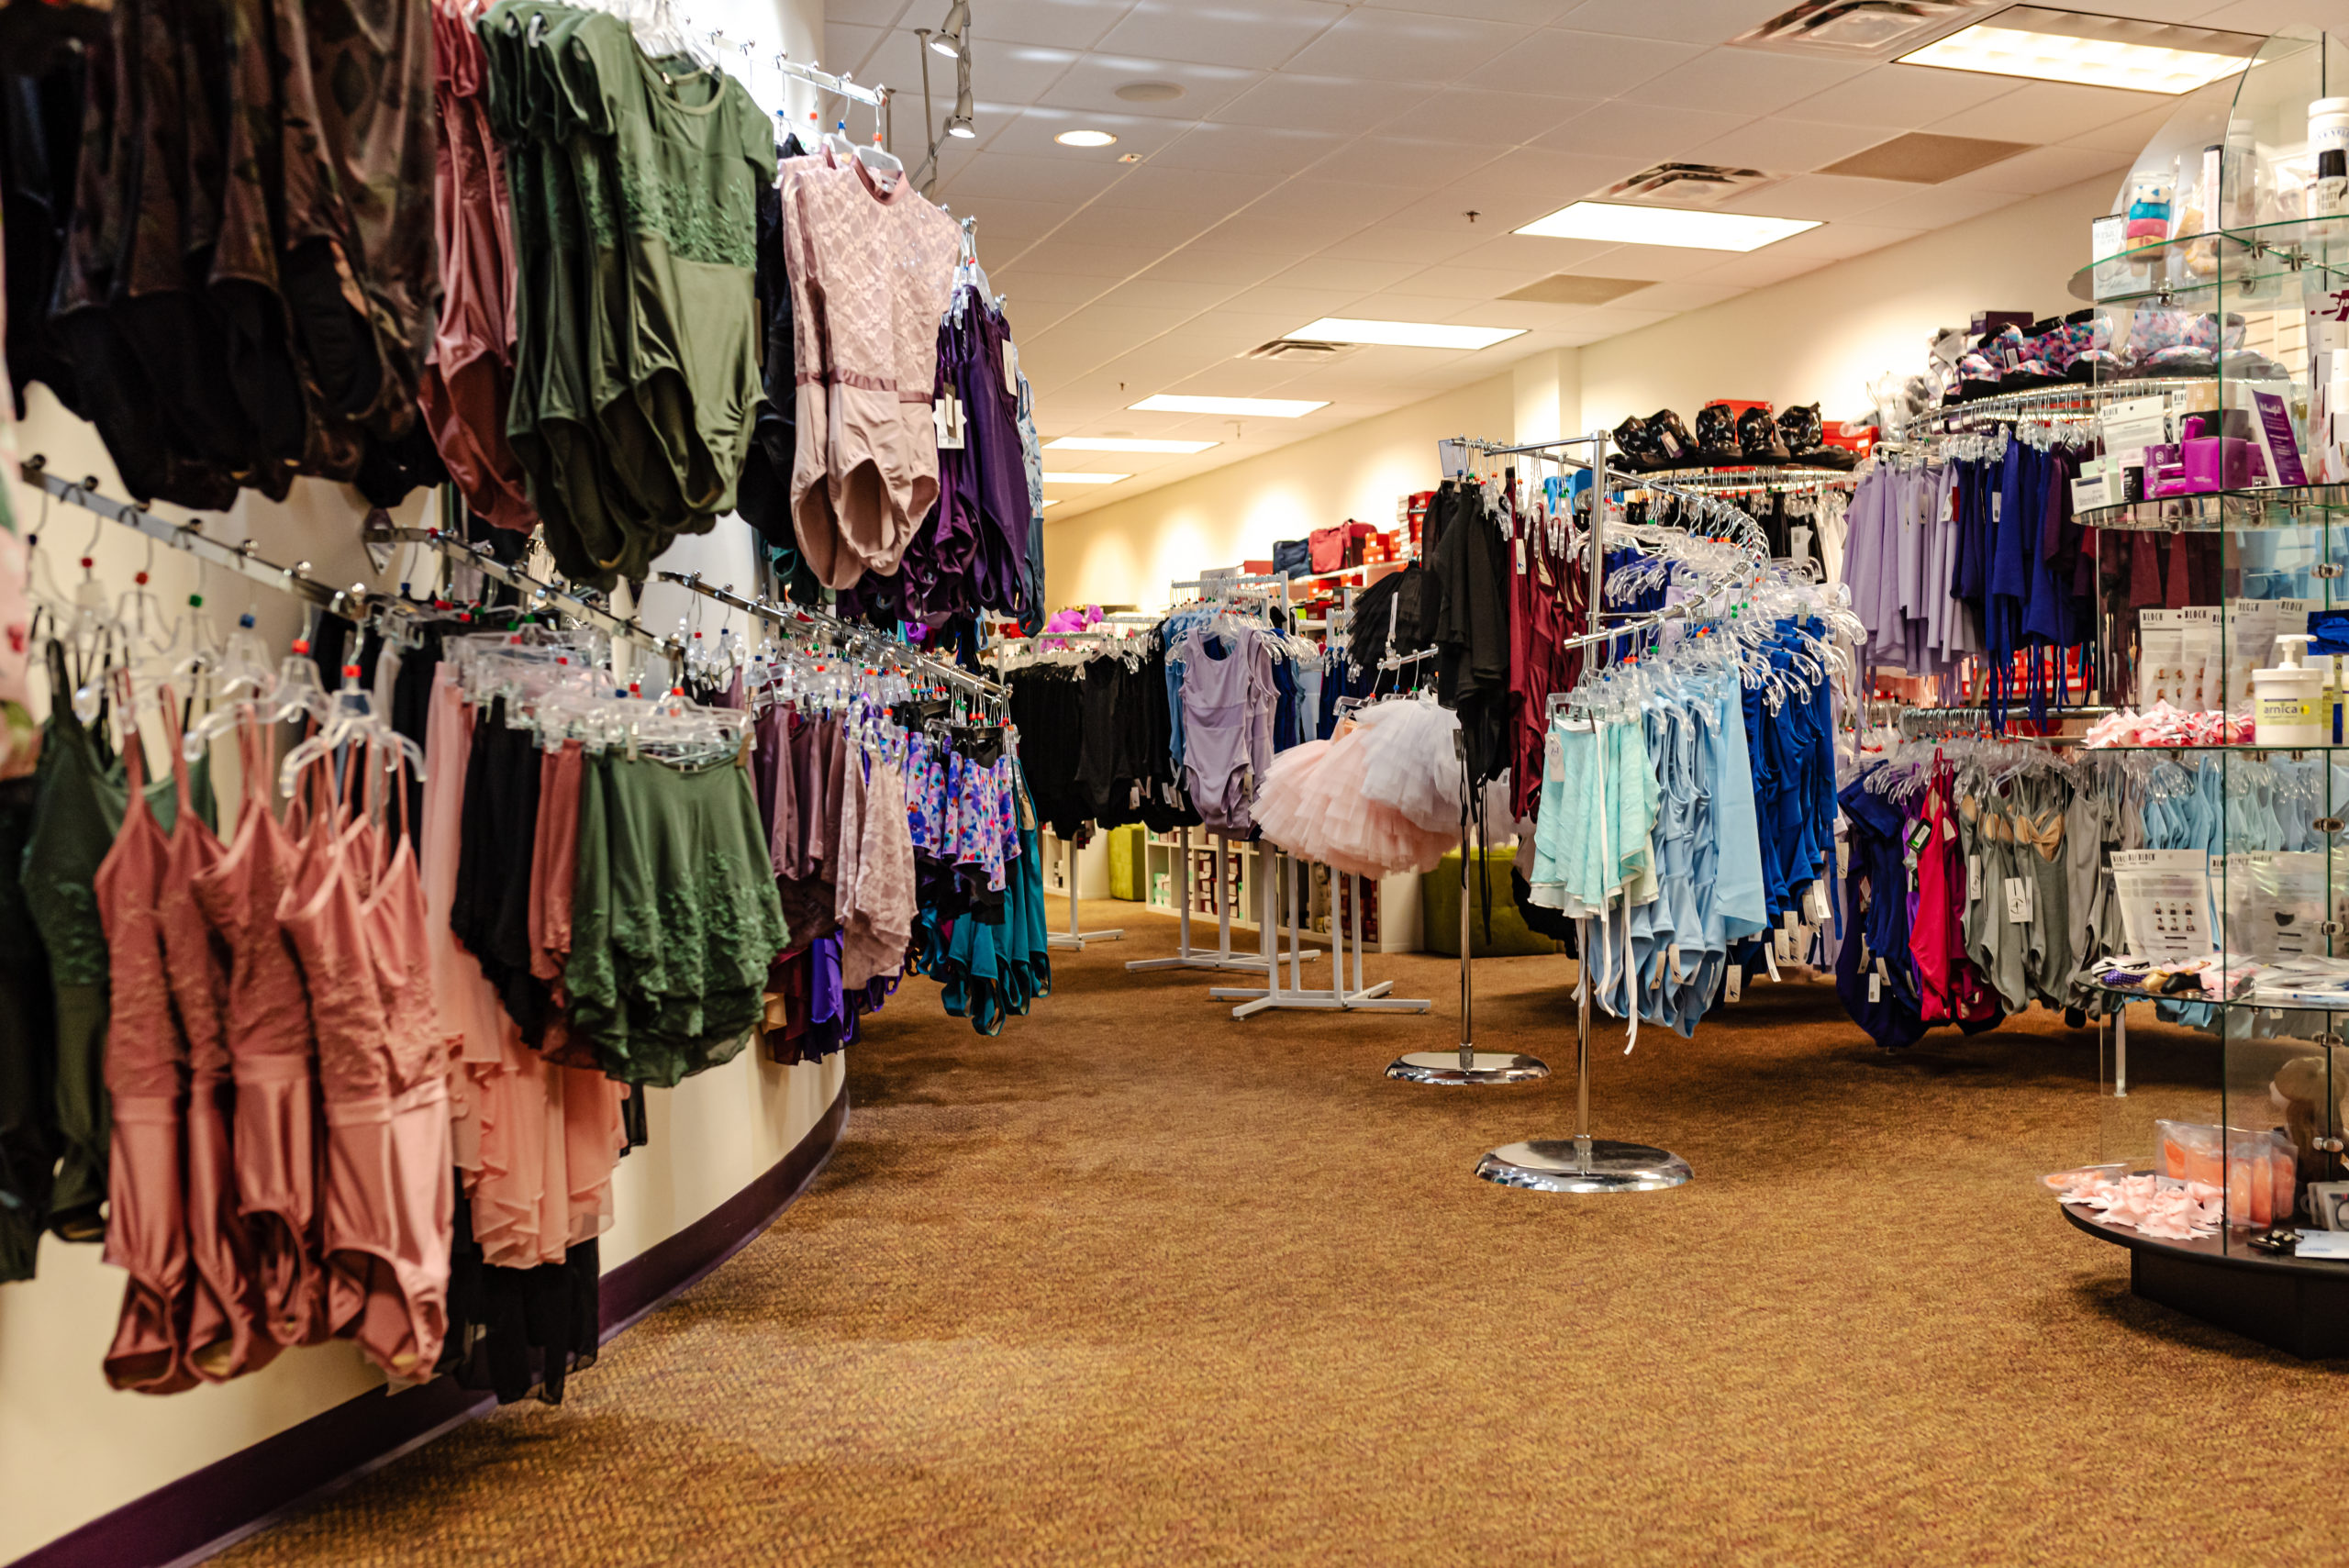 A small dancewear store has racks and displays full of colorful leotards and skirts, as well as shelves full of accessories.